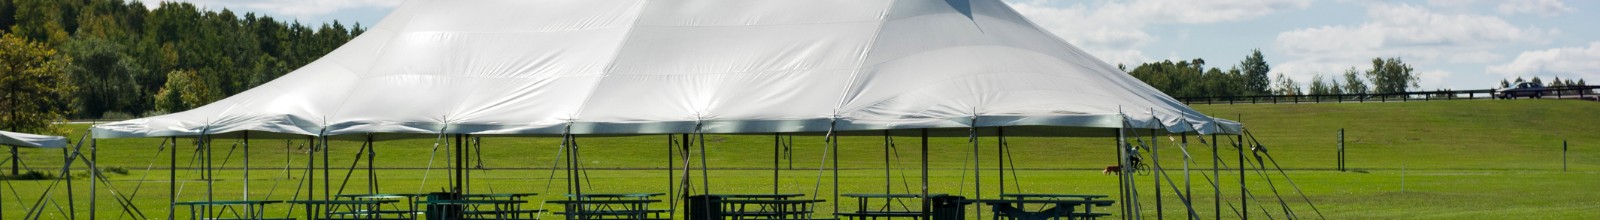 A giant tent stands in a field 